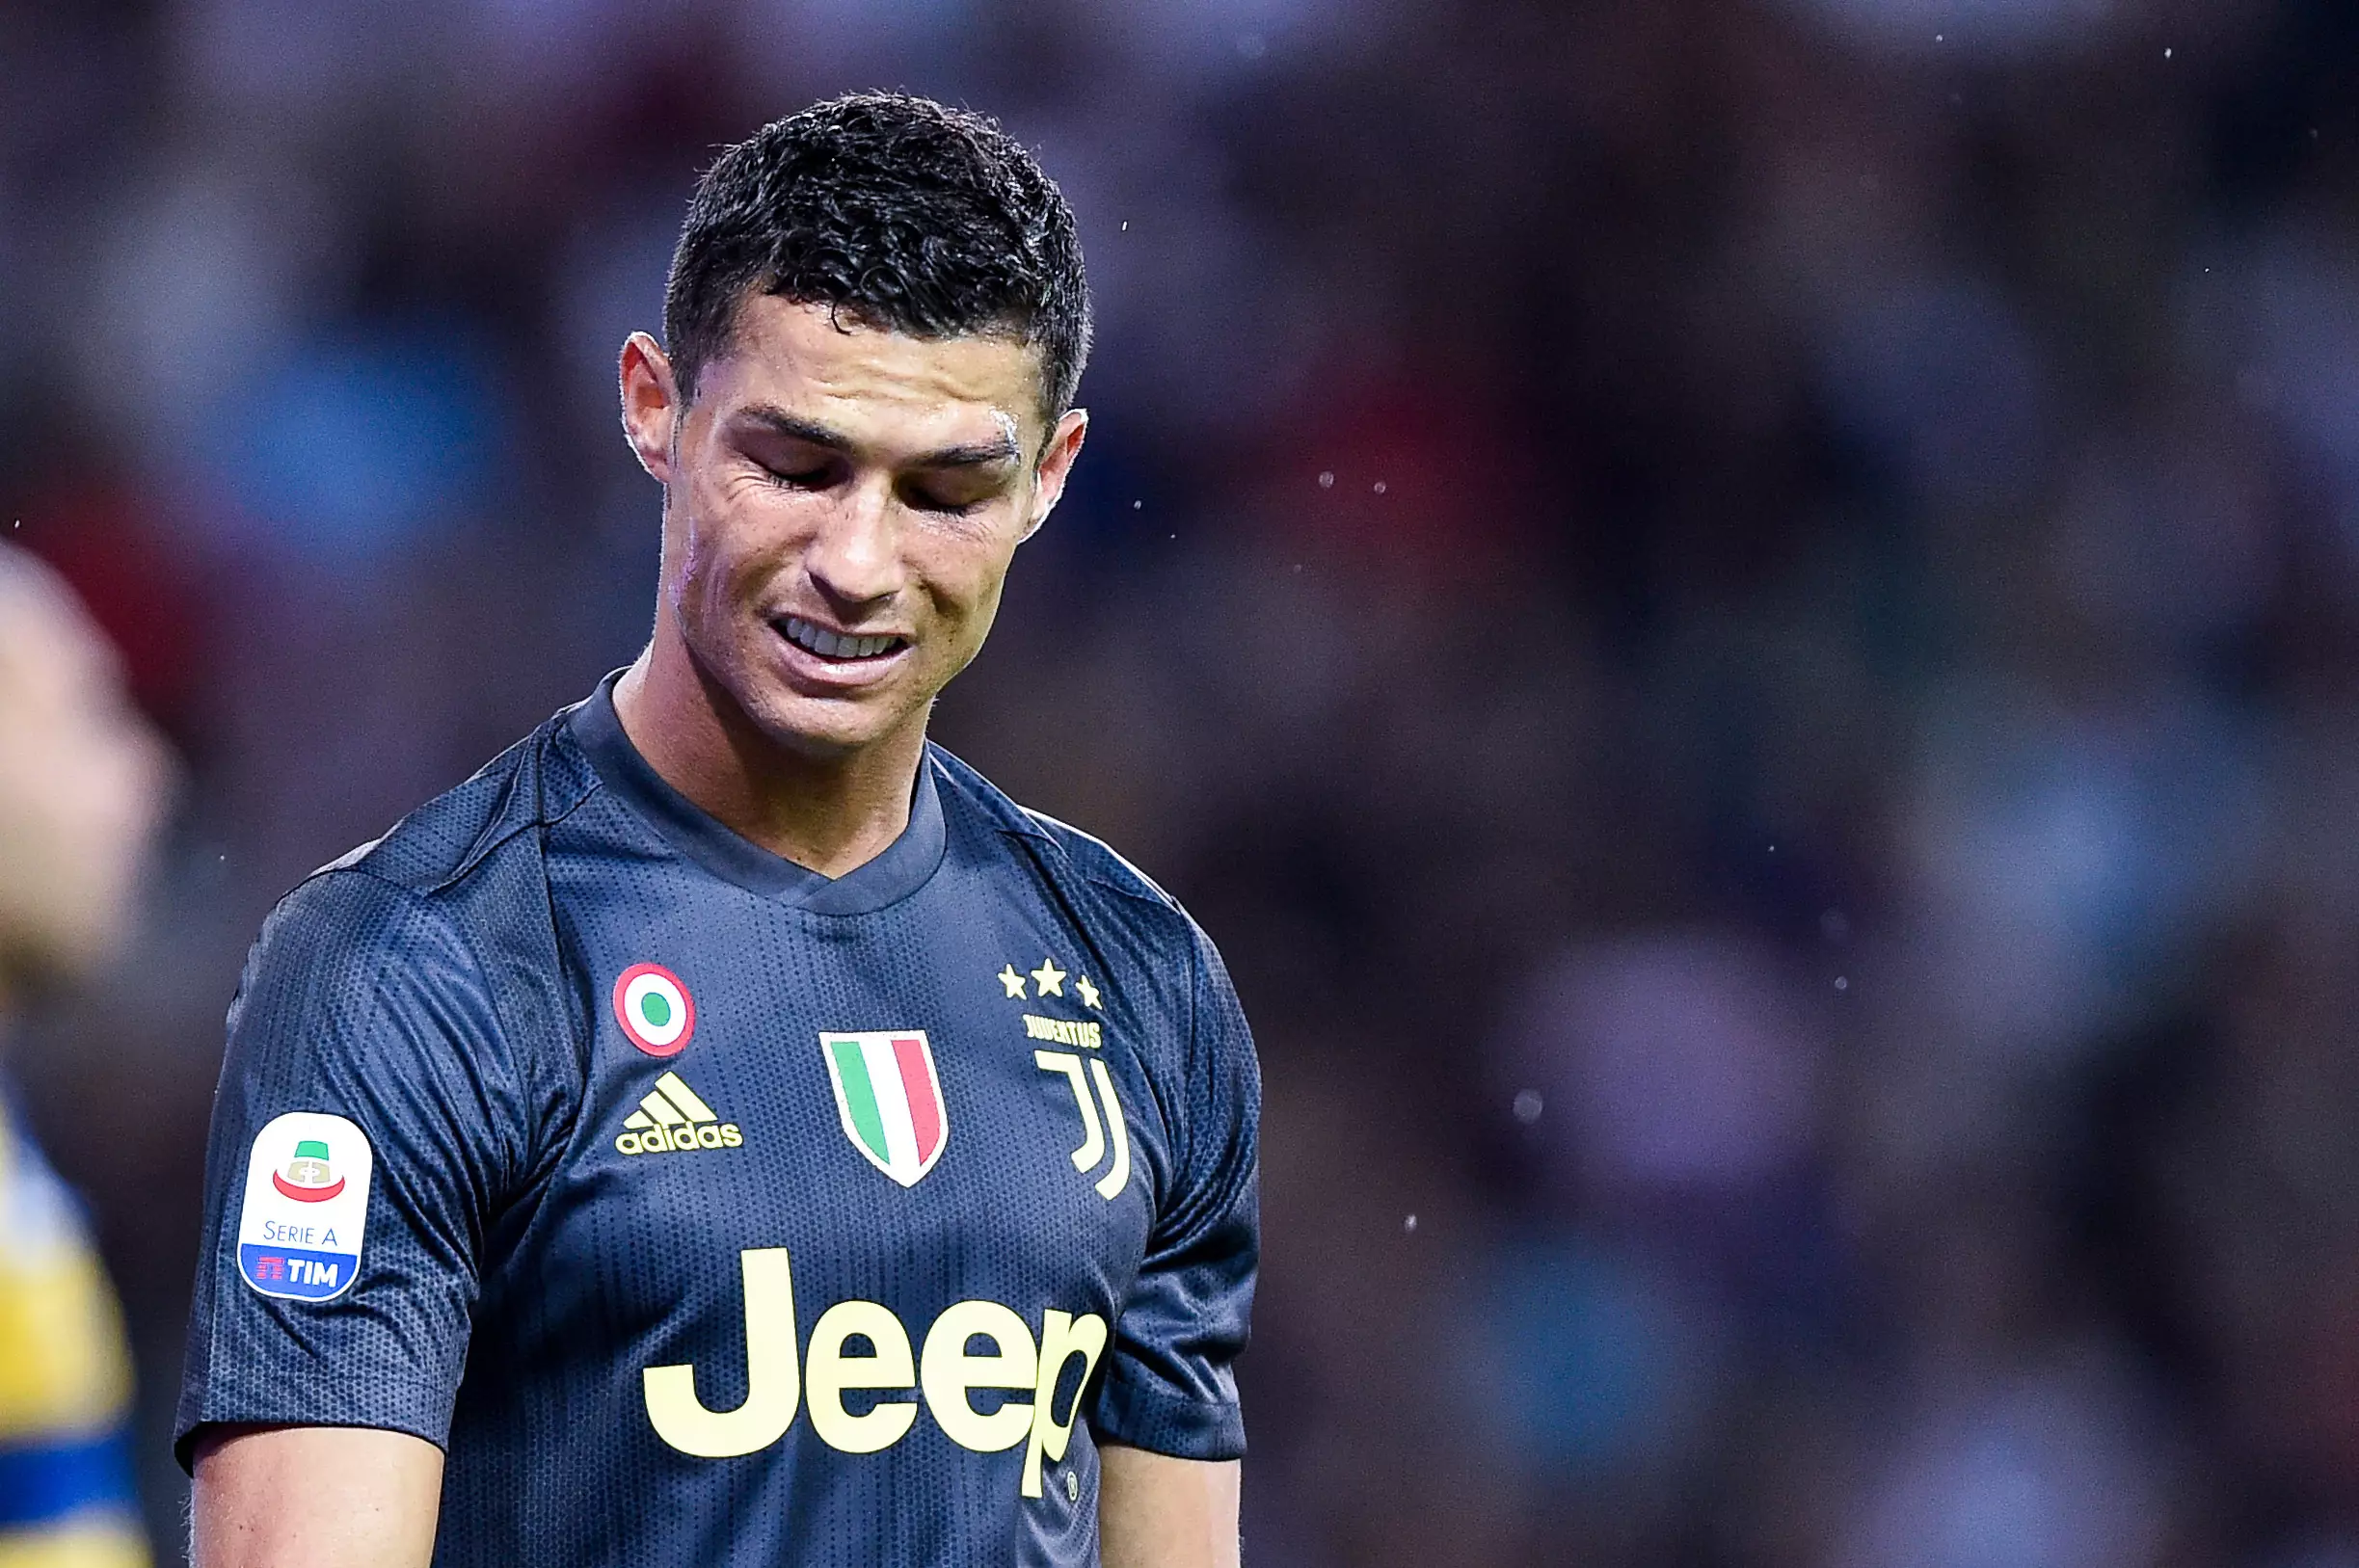 Ronaldo is yet to score in Turin. Image: PA Images